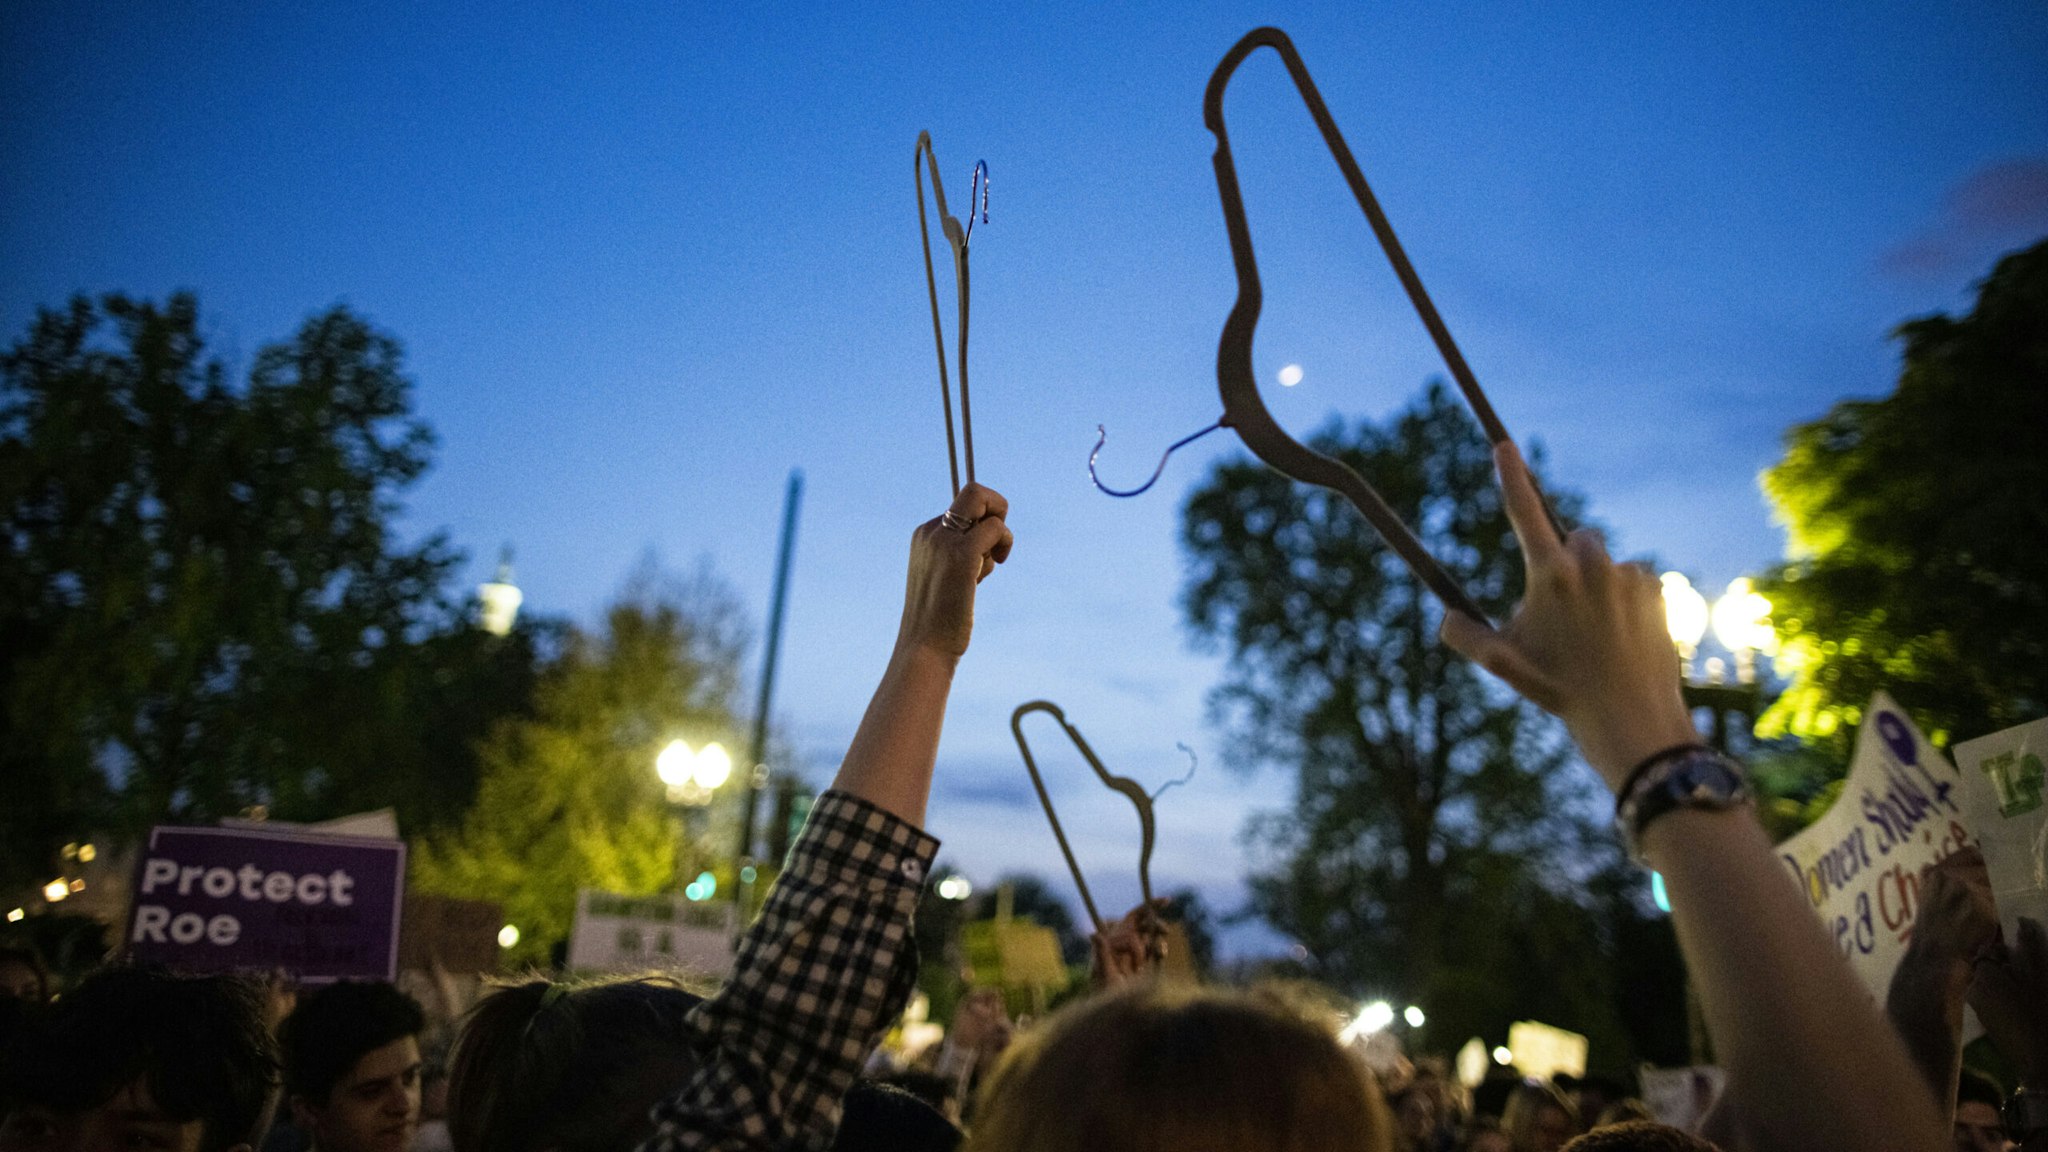 Abortion rights demonstrators with hangers during a protest outside the U.S. Supreme Court in Washington, D.C., U.S., on Tuesday, May 3, 2022.